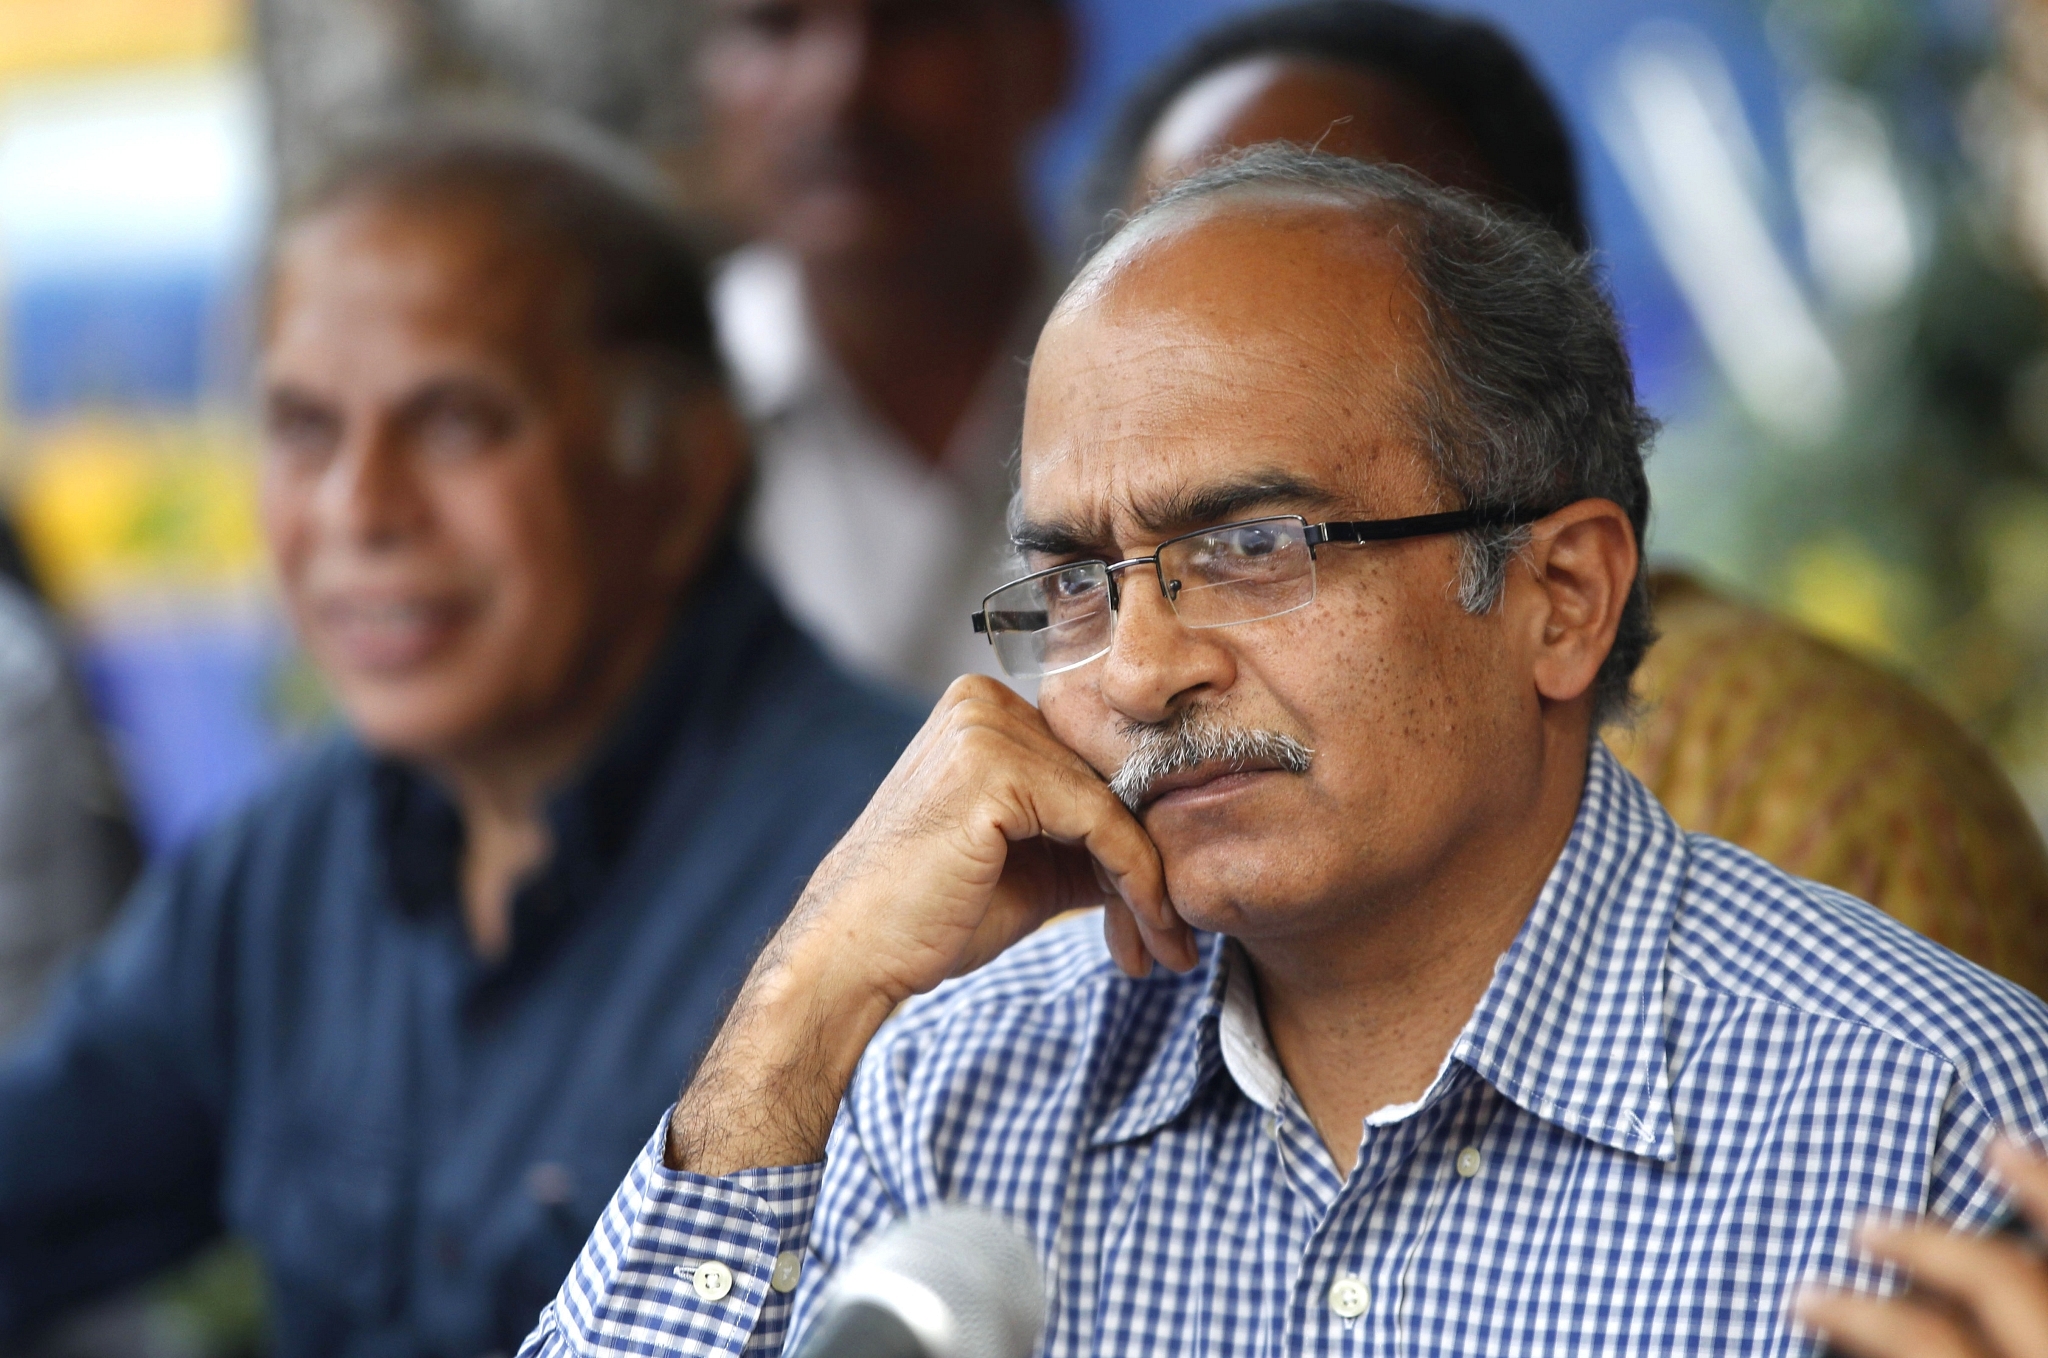 Prashant Bhushan during a press conference at the Press Club of India on 15 April 2015 in New Delhi. (Ajay Aggarwal/ Hindustan Times via Getty Images)